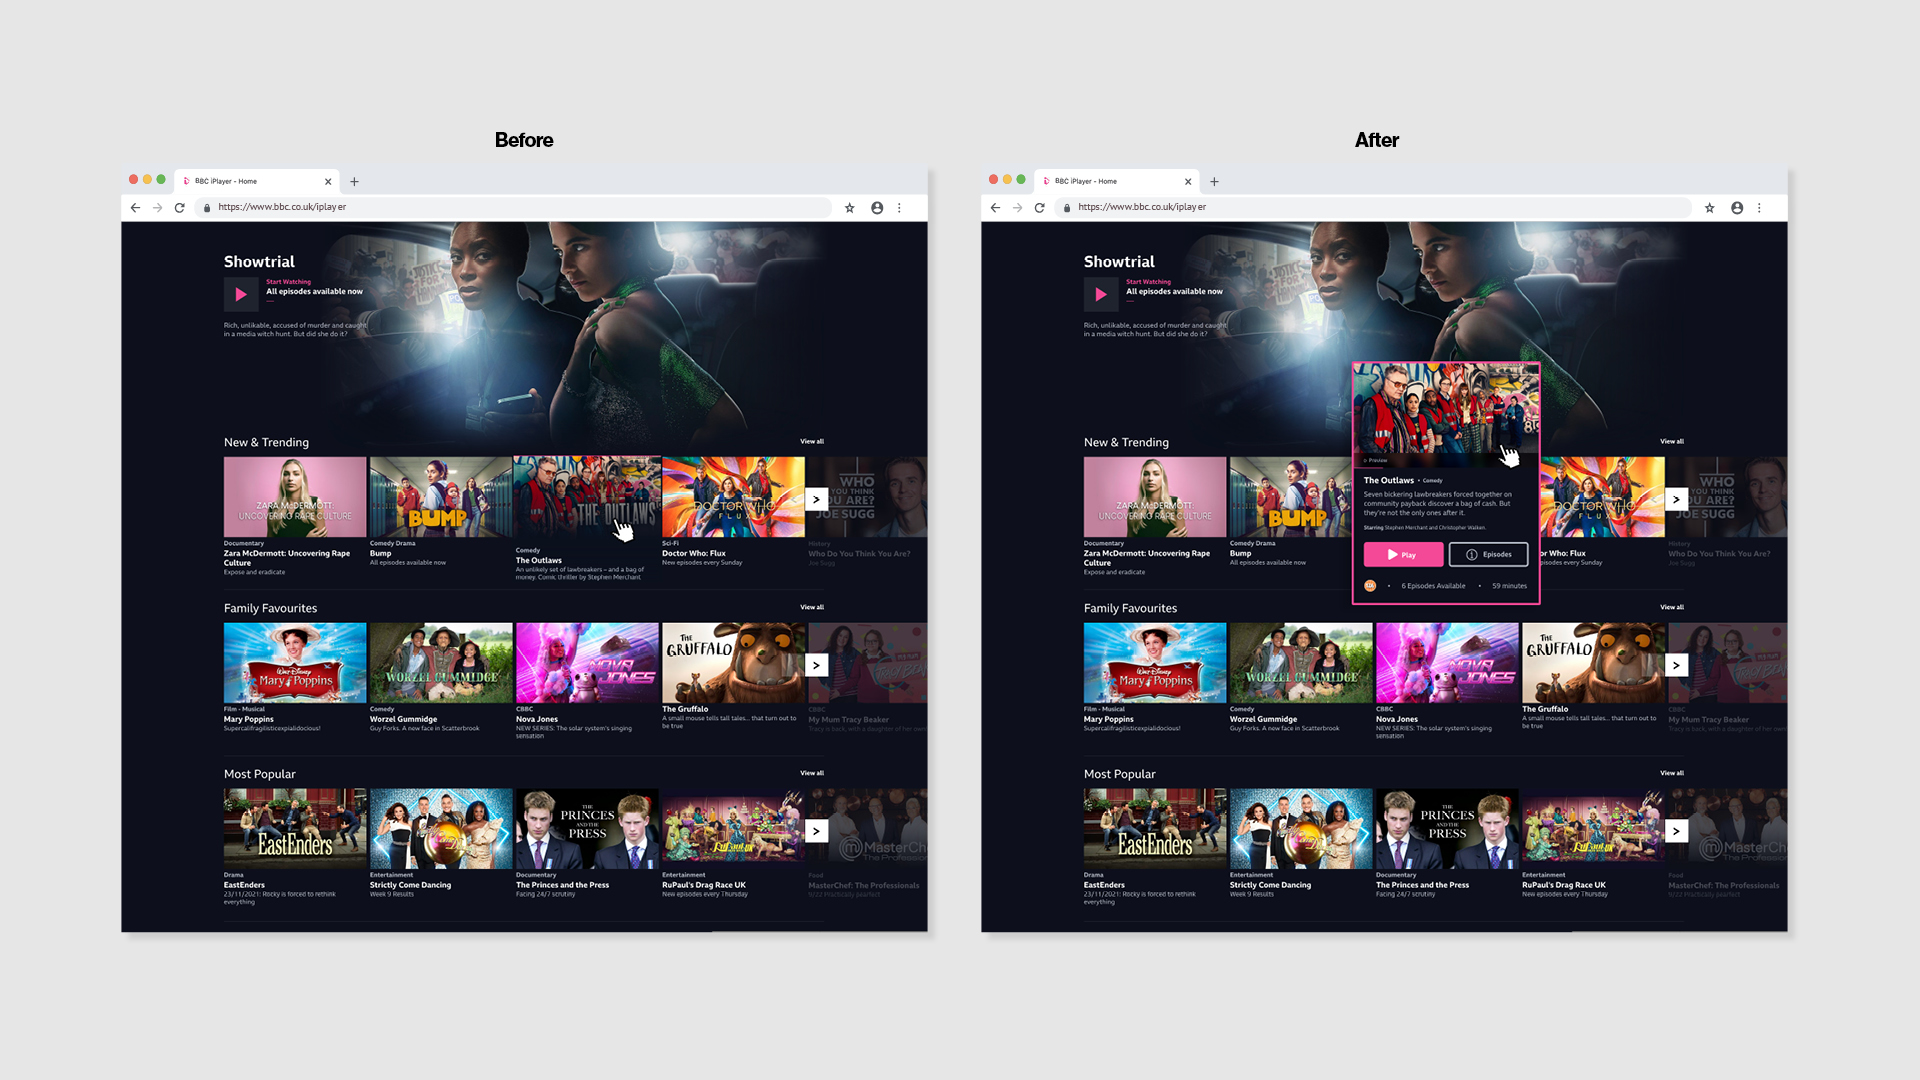 BBC iPlayer – Before and After